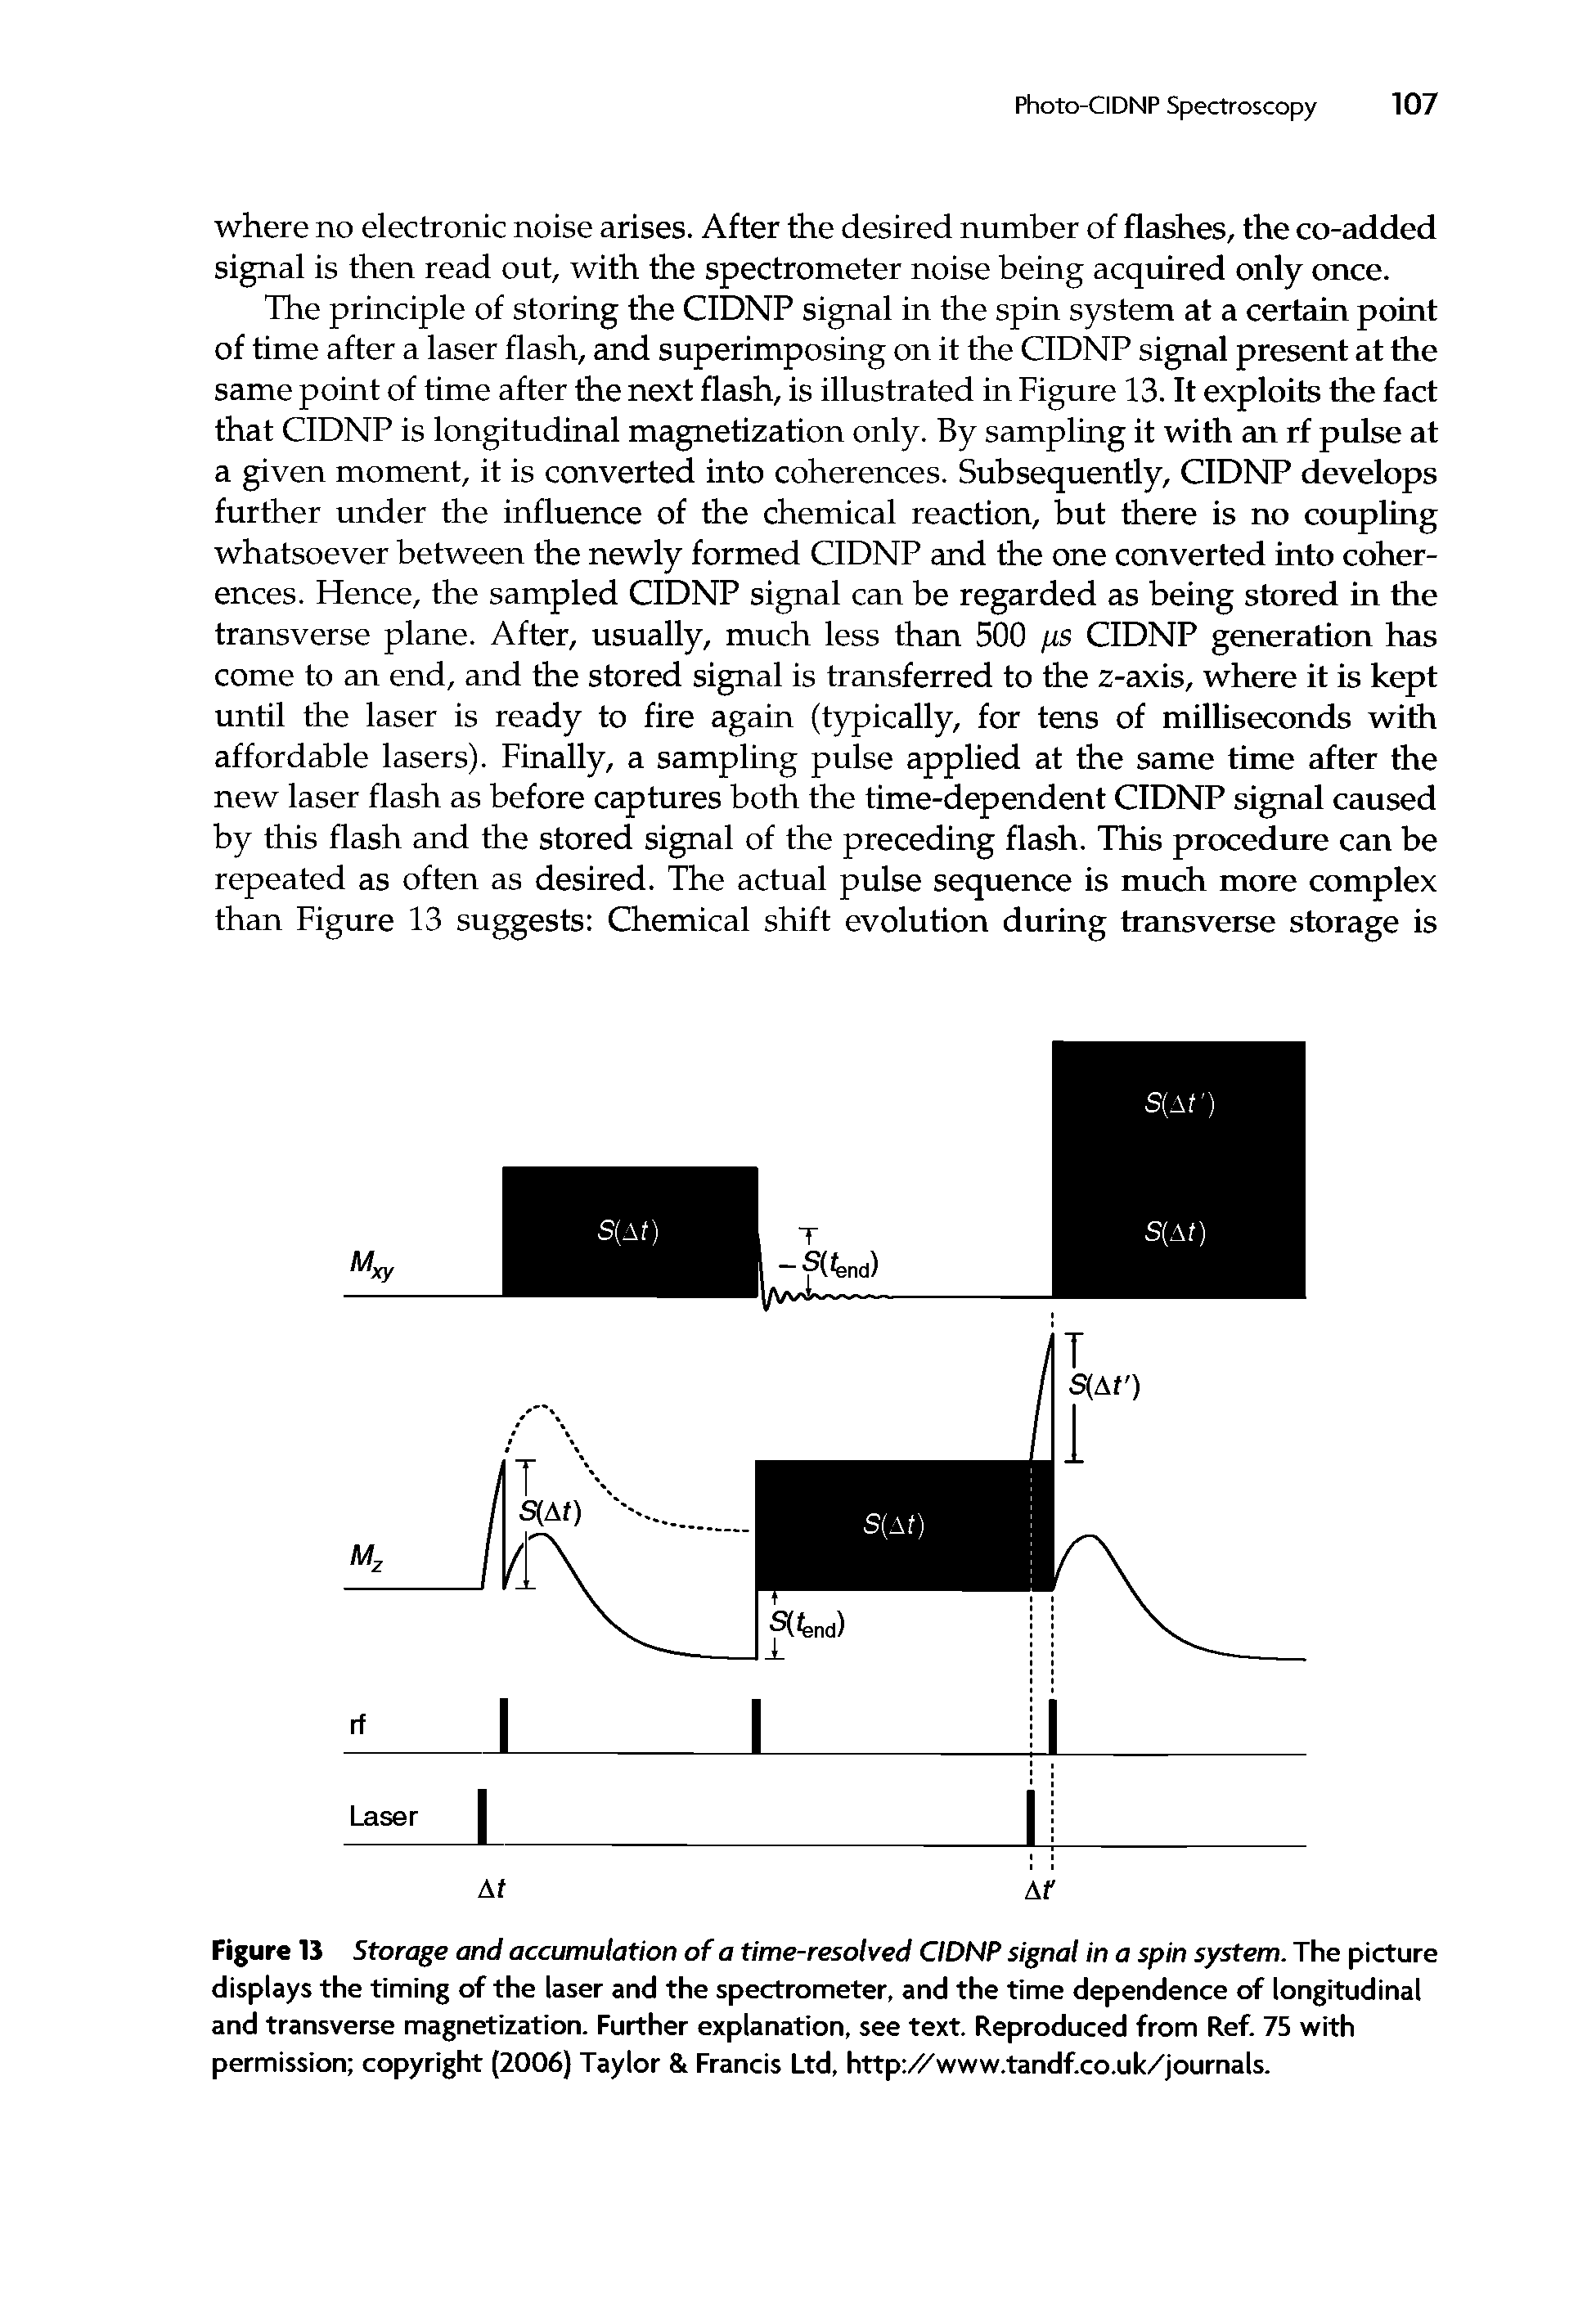 Figure 13 Storage and accumulation of a time-resolved CIDNP signal in a spin system. The picture displays the timing of the laser and the spectrometer, and the time dependence of longitudinal and transverse magnetization. Further explanation, see text. Reproduced from Ref 75 with permission copyright (2006) Taylor Francis Ltd, httpr/ www.tandfco.uk/journals.